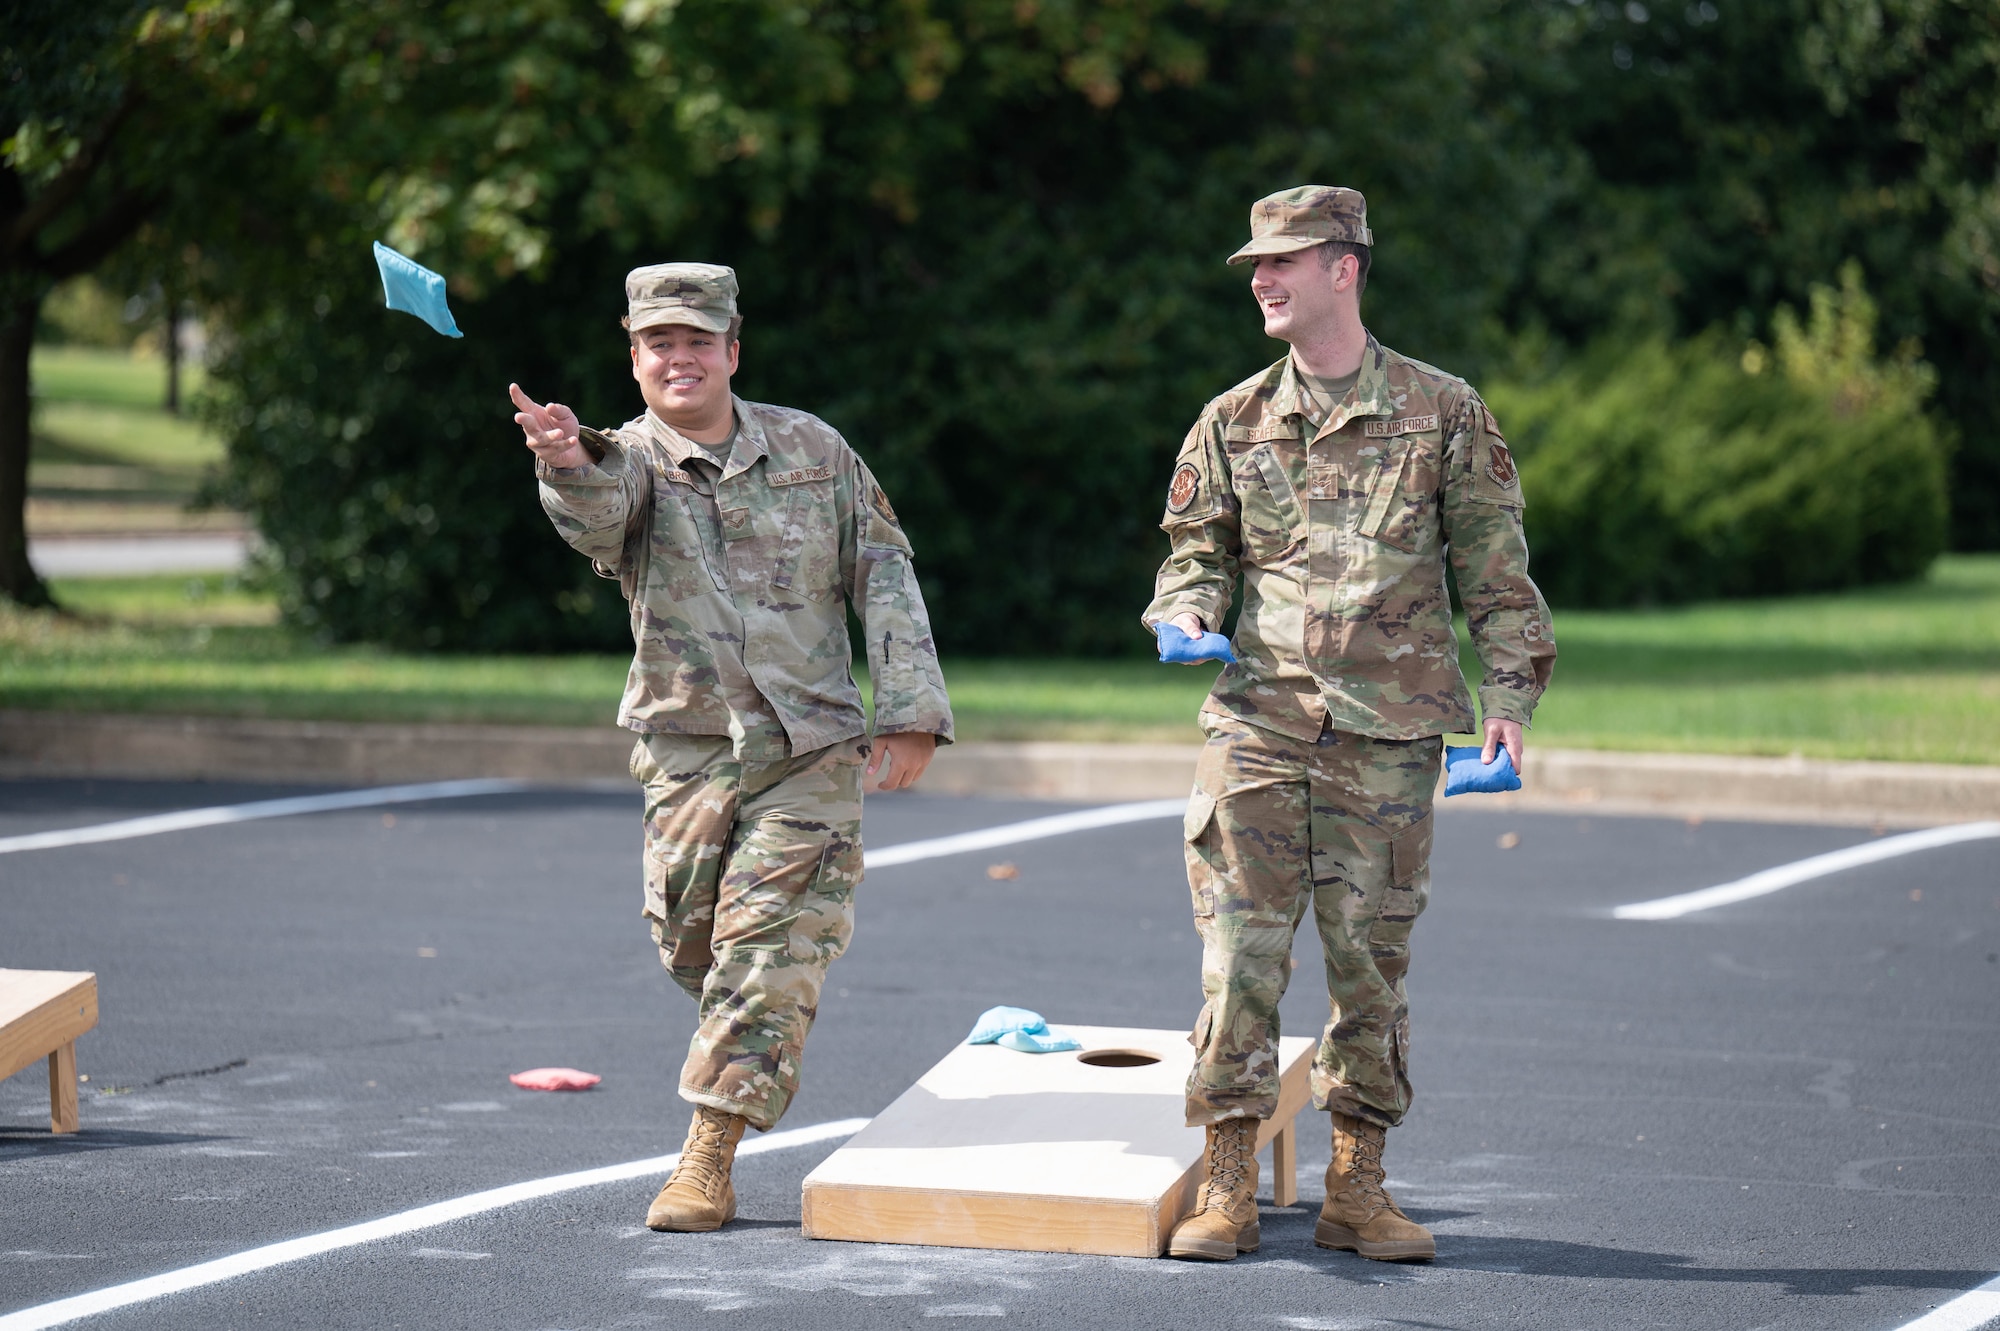 Senior Airman Christian Brodeur and Airman Kyler Scaff play a game of corn hole at the Sentinels Celebration, Joint Base Anacostia-Bolling, Washington, D.C., Oct. 12, 2022. The Sentinels Celebration was held in honor of the base reaching Full Operational Capability after the first-ever Department of Defense lead service transfer in 2020. (U.S. Air Force photo by Kristen Wong)